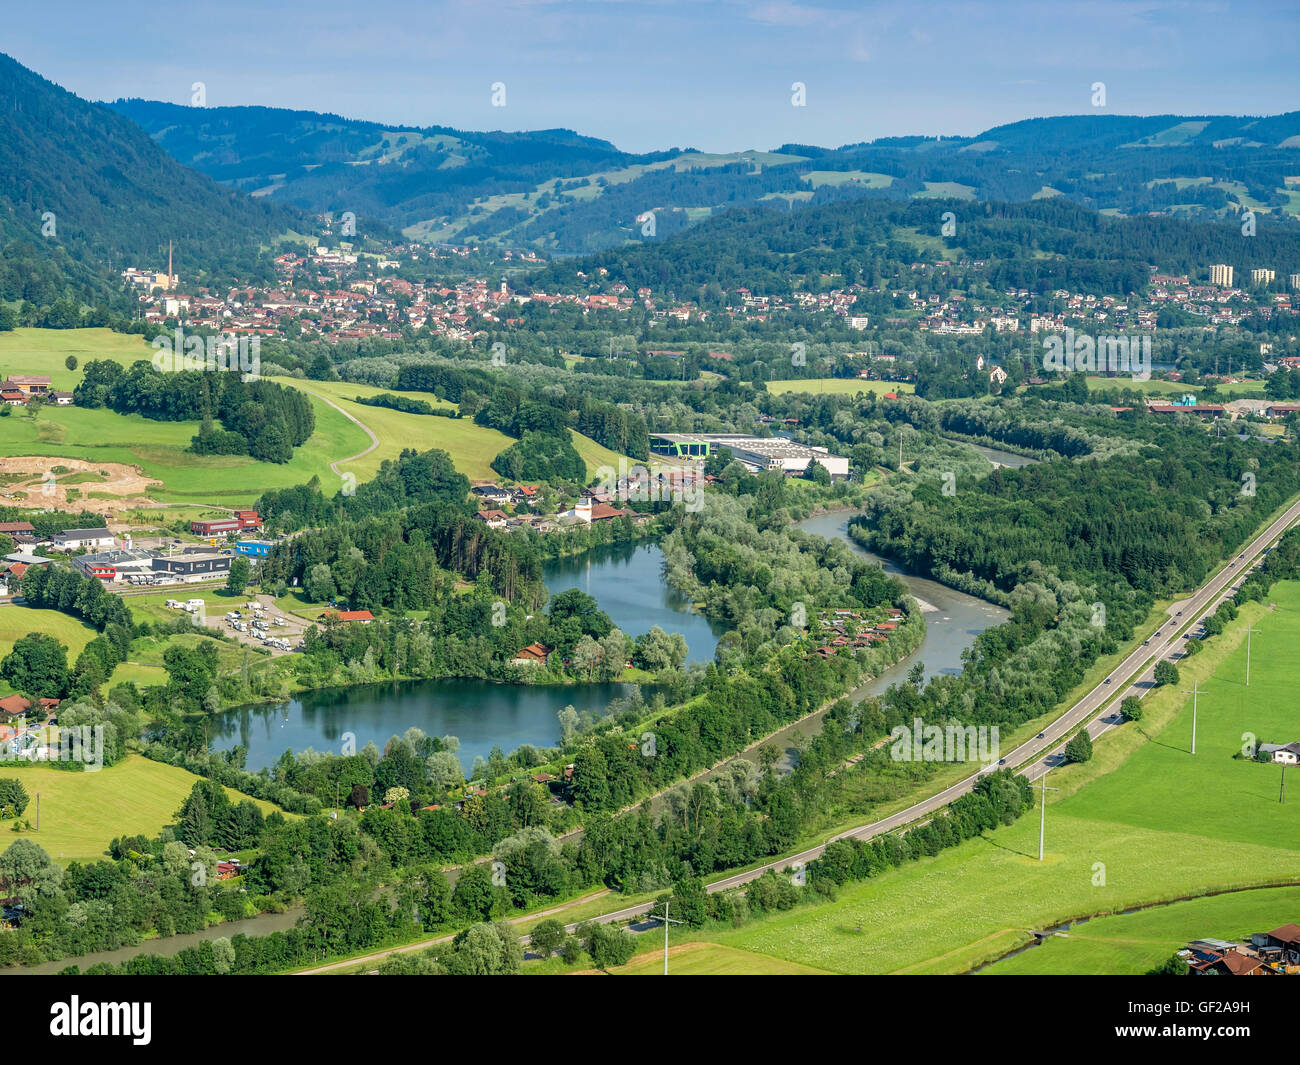 Aerial view, river Iller and lakes northwest of Sonthofen, town of Immenstadt in the back left, lakes and motorway Stock Photo